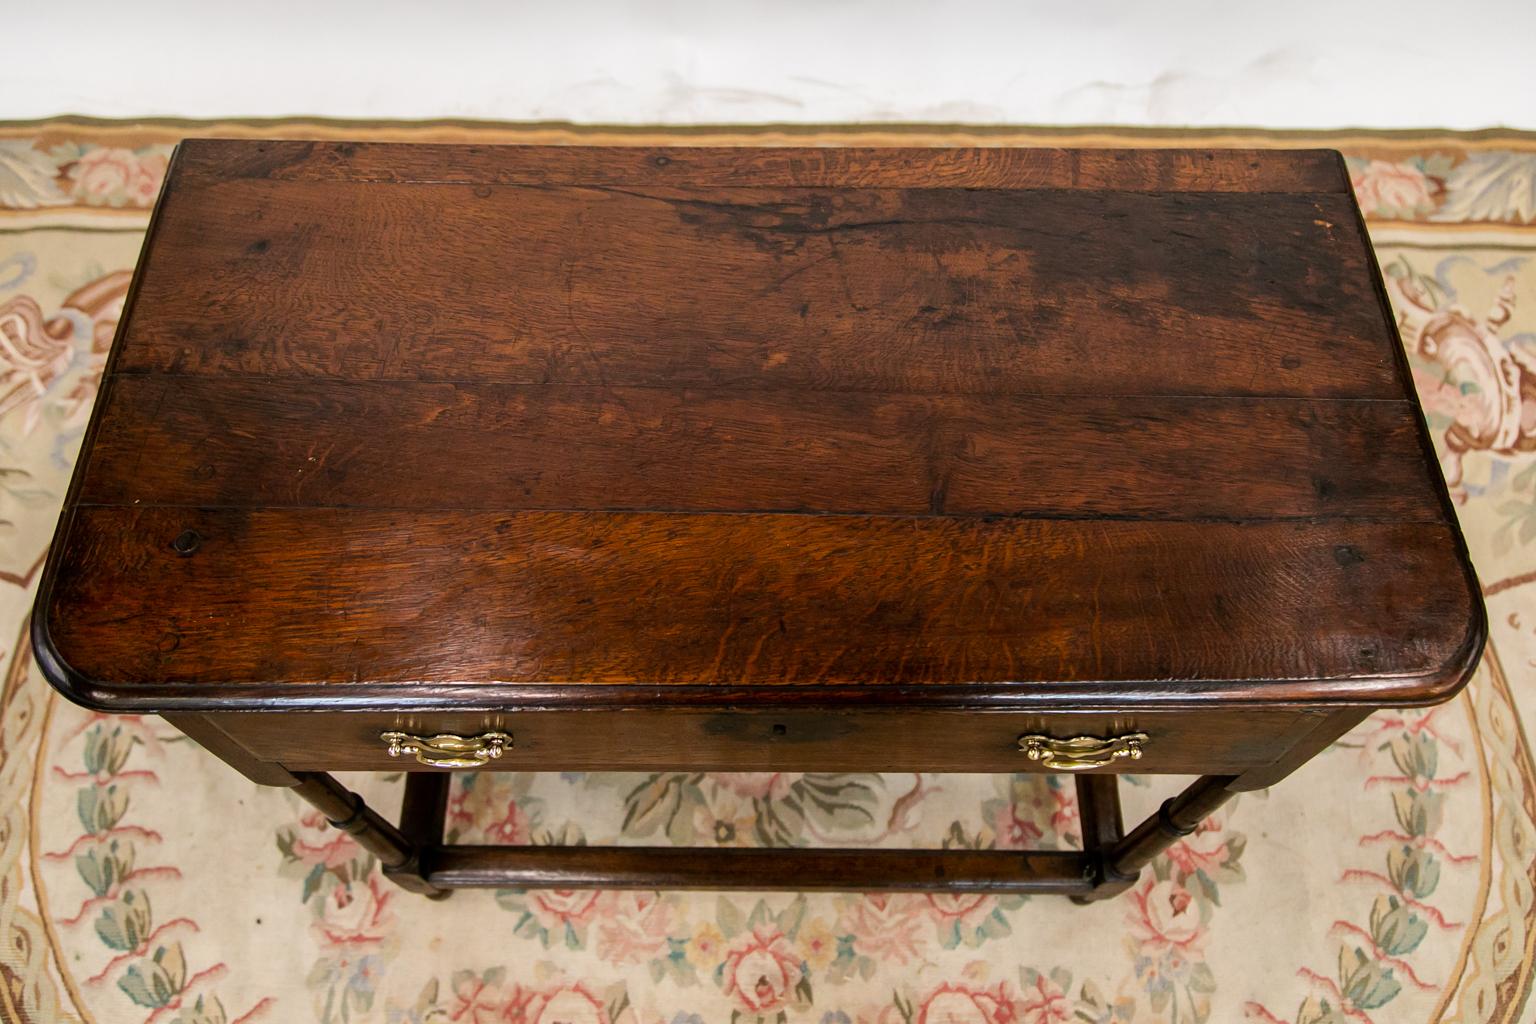 The top of this stretcher table has a molded edge and exposed peg construction. The lower edge of the apron has carved beading. The legs are turned and joined by stretchers that have a shaped molded top.